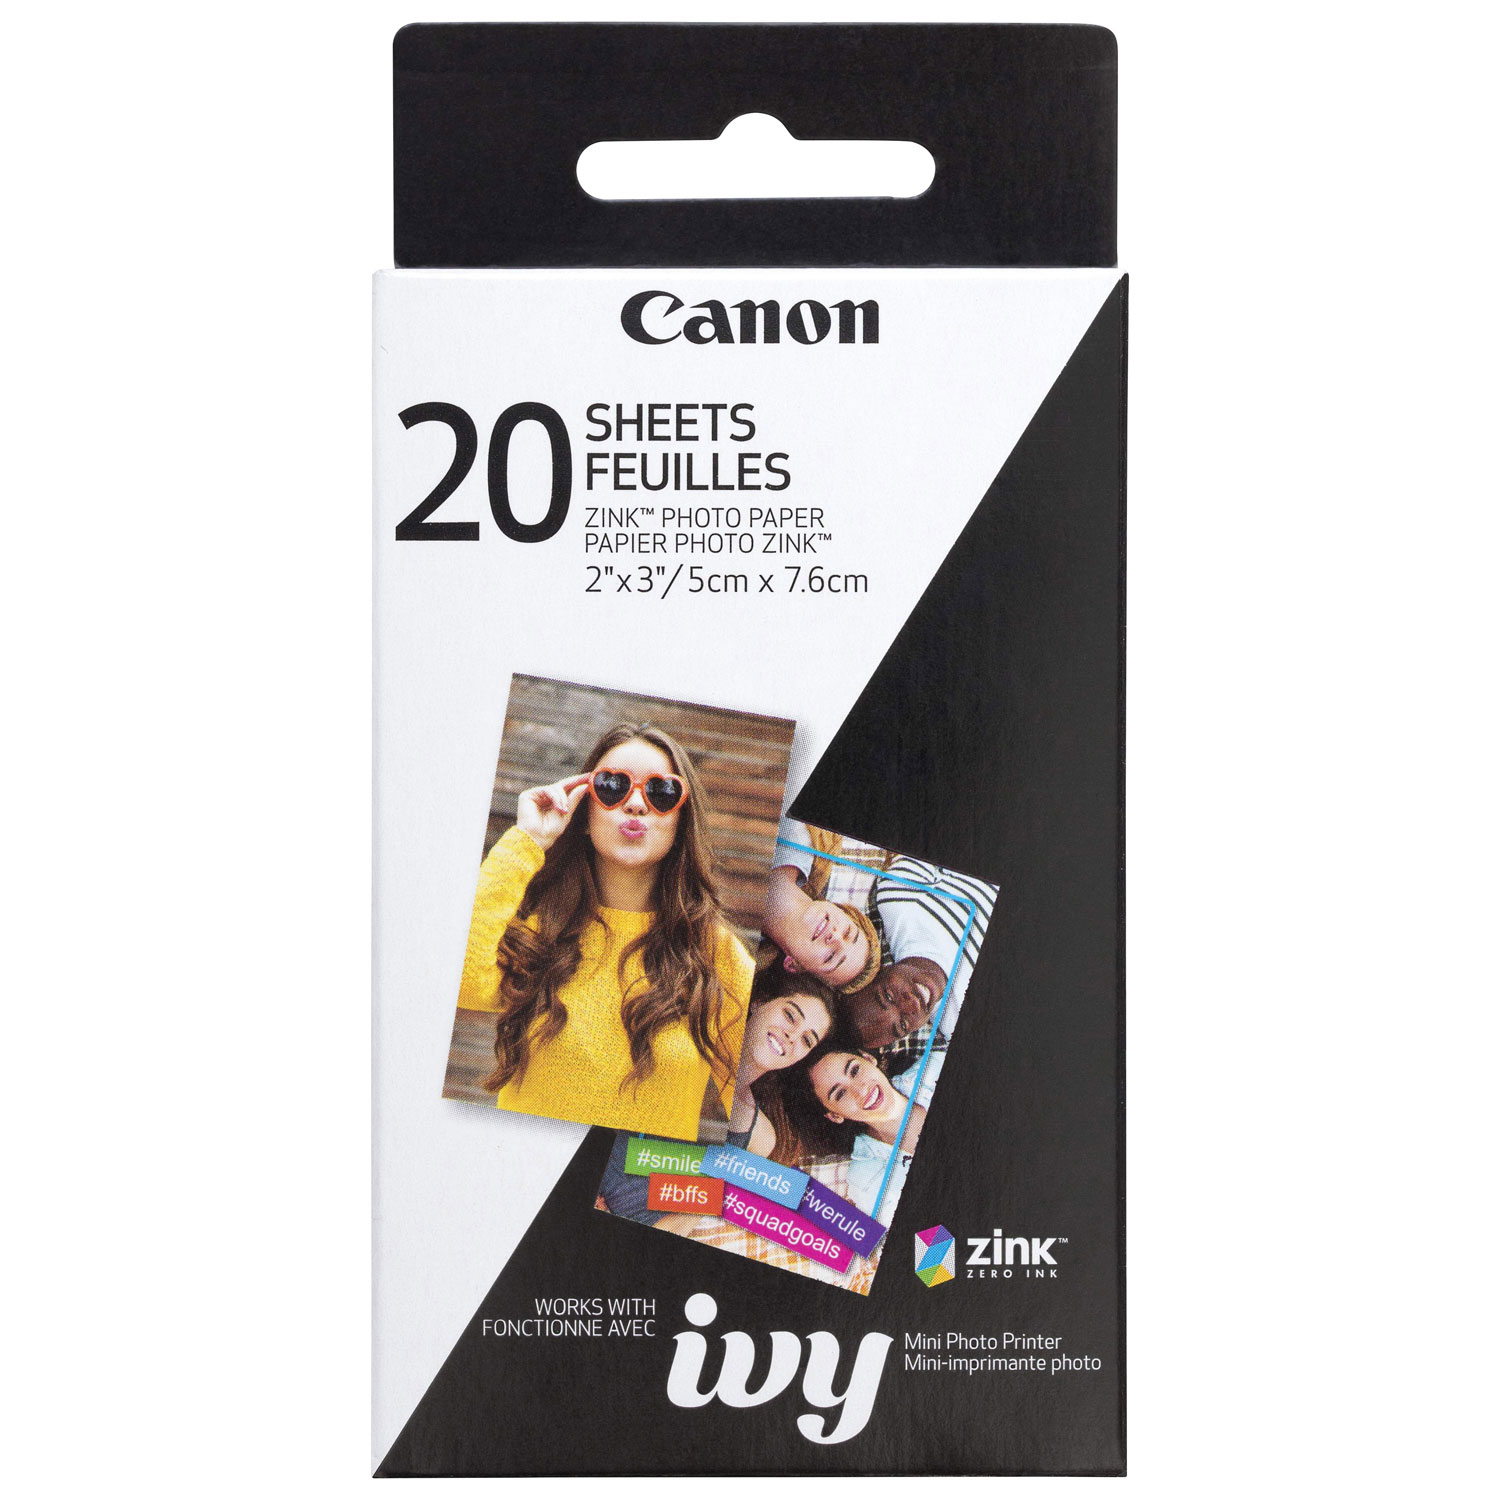 Canon ZINK 20-Sheet 2" x 3" Photo Paper for IVY Mini Photo Printer